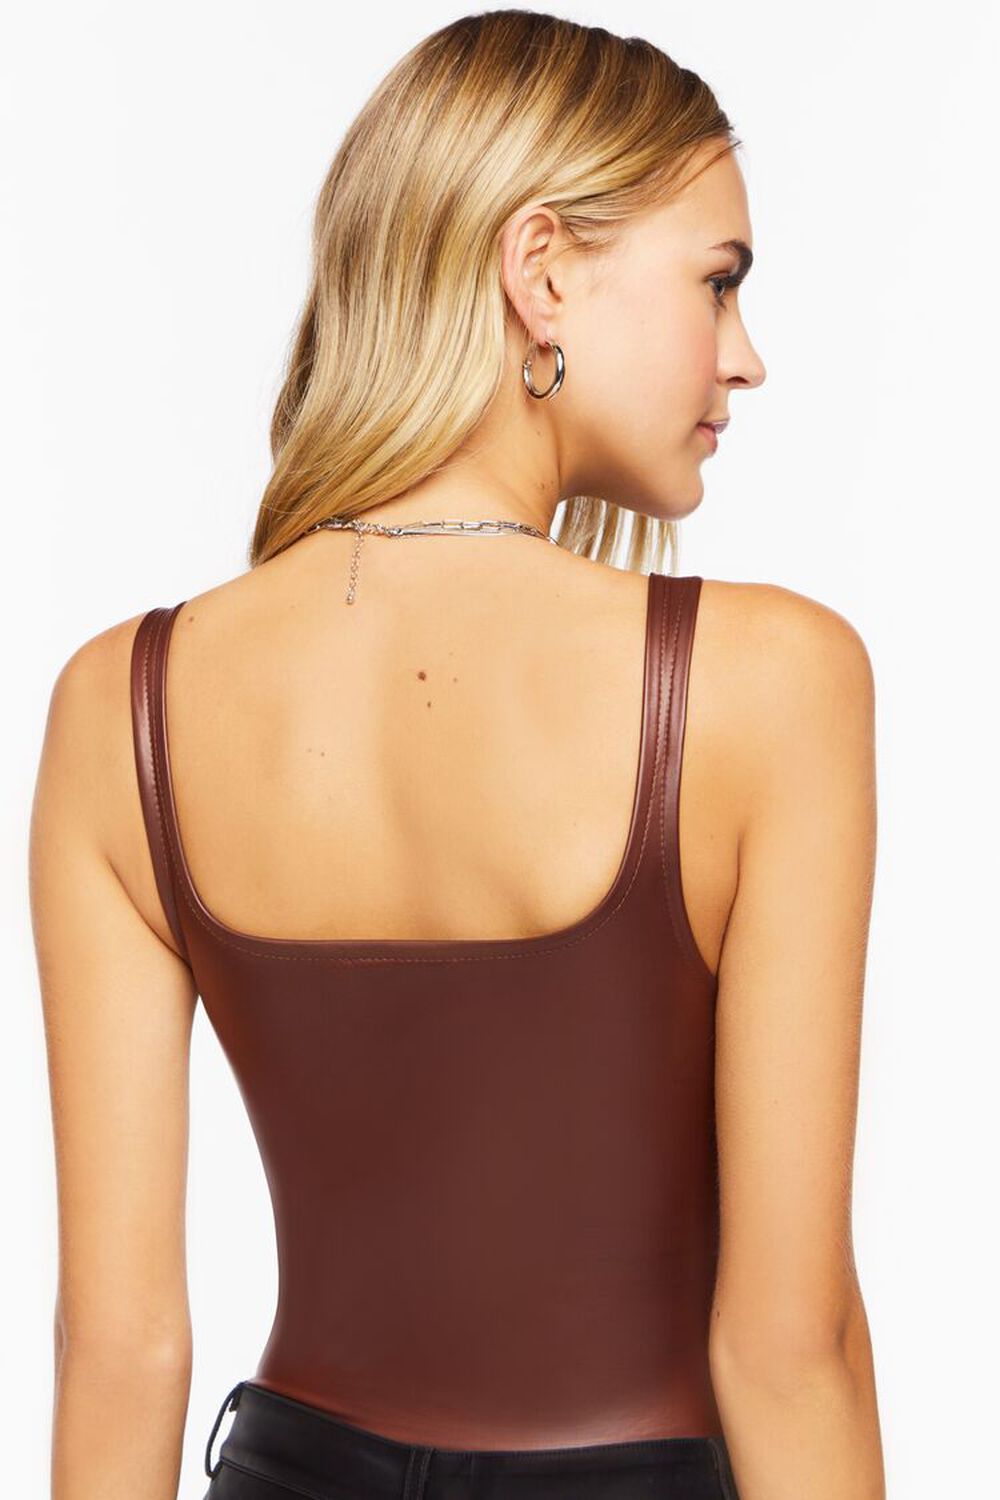 BROWN Faux Leather Cami Bodysuit, image 3